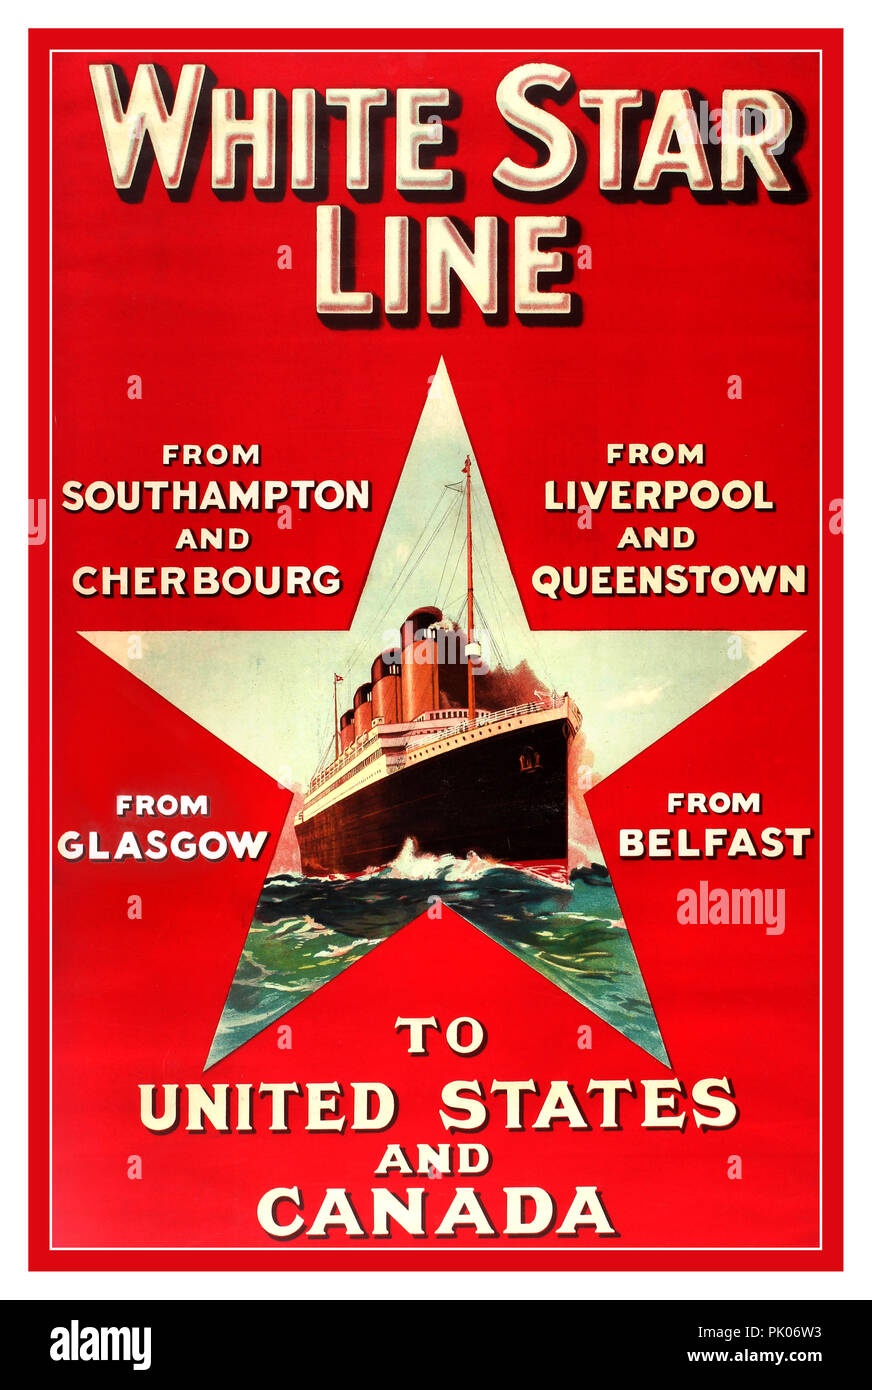 WHITE STAR LINE Vintage poster 1900’s Original vintage travel advertising poster for White Star Line From Southampton and Cherbourg From Liverpool and Queenstown From  Glasgow From Belfast To United States and Canada. Illustration of a four funnel TITANIC CLASS OCEAN LINER 1900’s Original vintage travel advertising poster for White Star Line inside the shape of a star Printed by the Liverpool Printing & Stationery Company UK 1900’s, Stock Photo